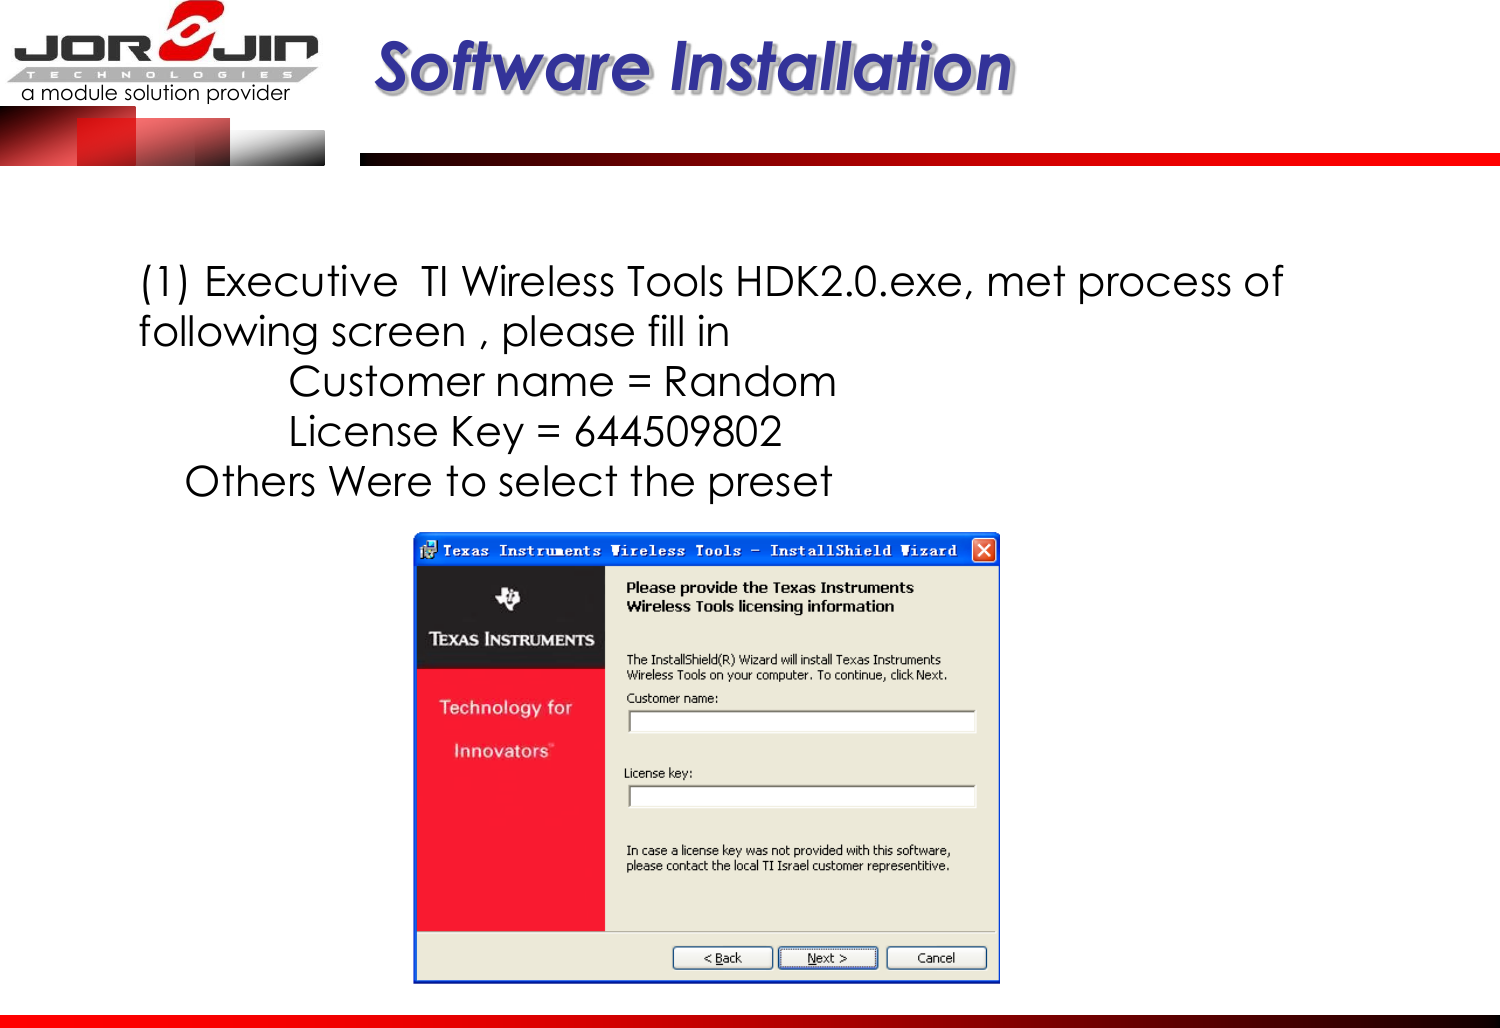 a module solution provider  Software lnstallation (1) Executive  TI Wireless Tools HDK2.0.exe, met process of following screen , please fill in    Customer name = Random   License Key = 644509802     Others Were to select the preset 